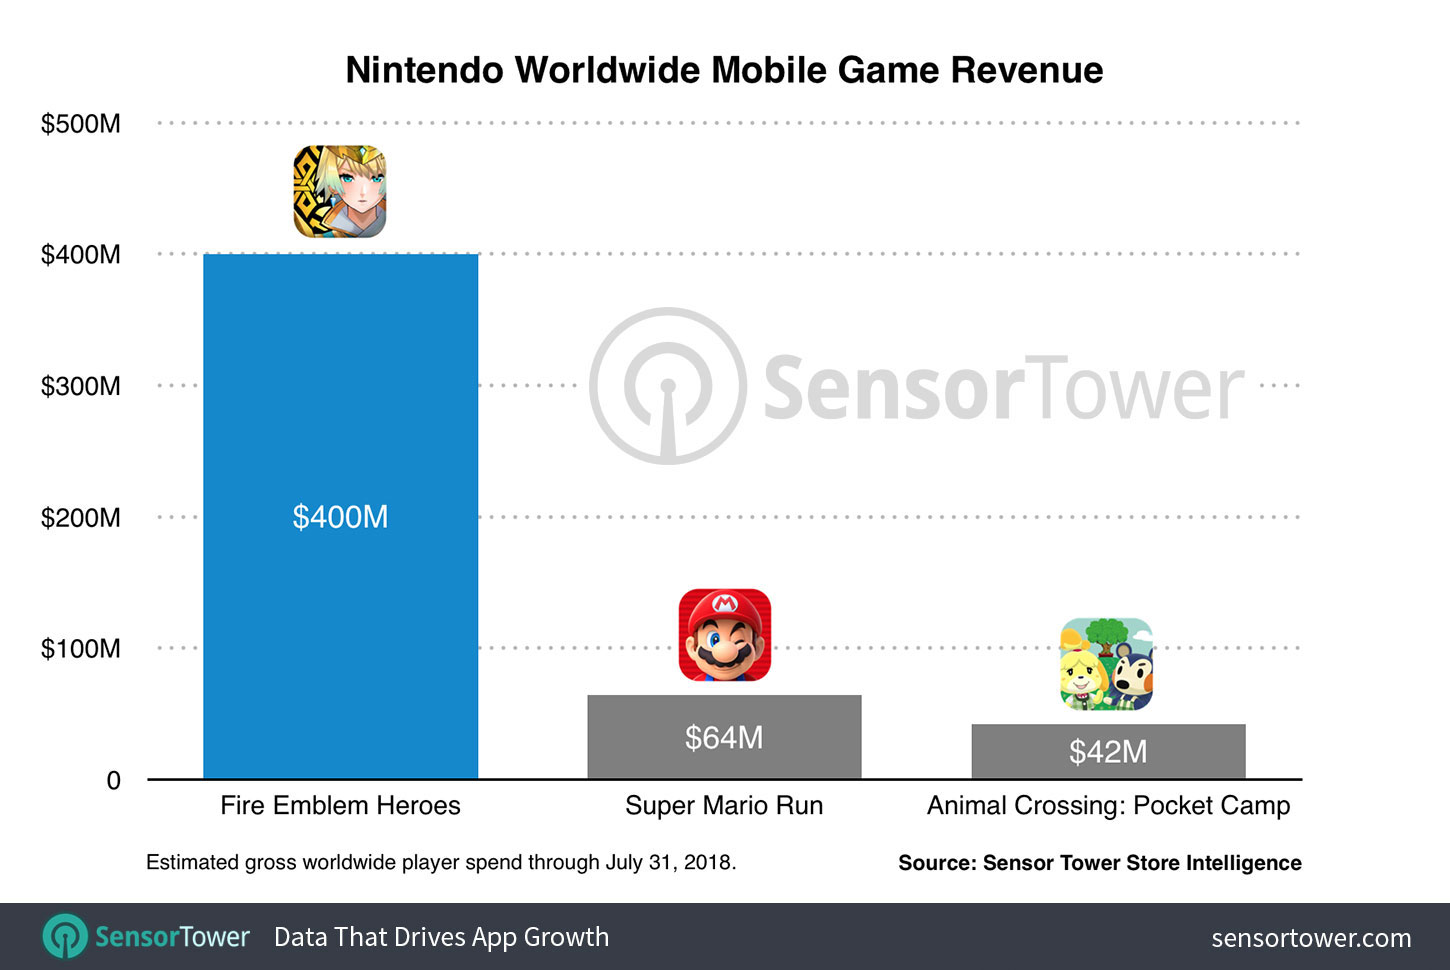 Fire Emblem Heroes Revenue Compared to Other Nintendo Mobile Games